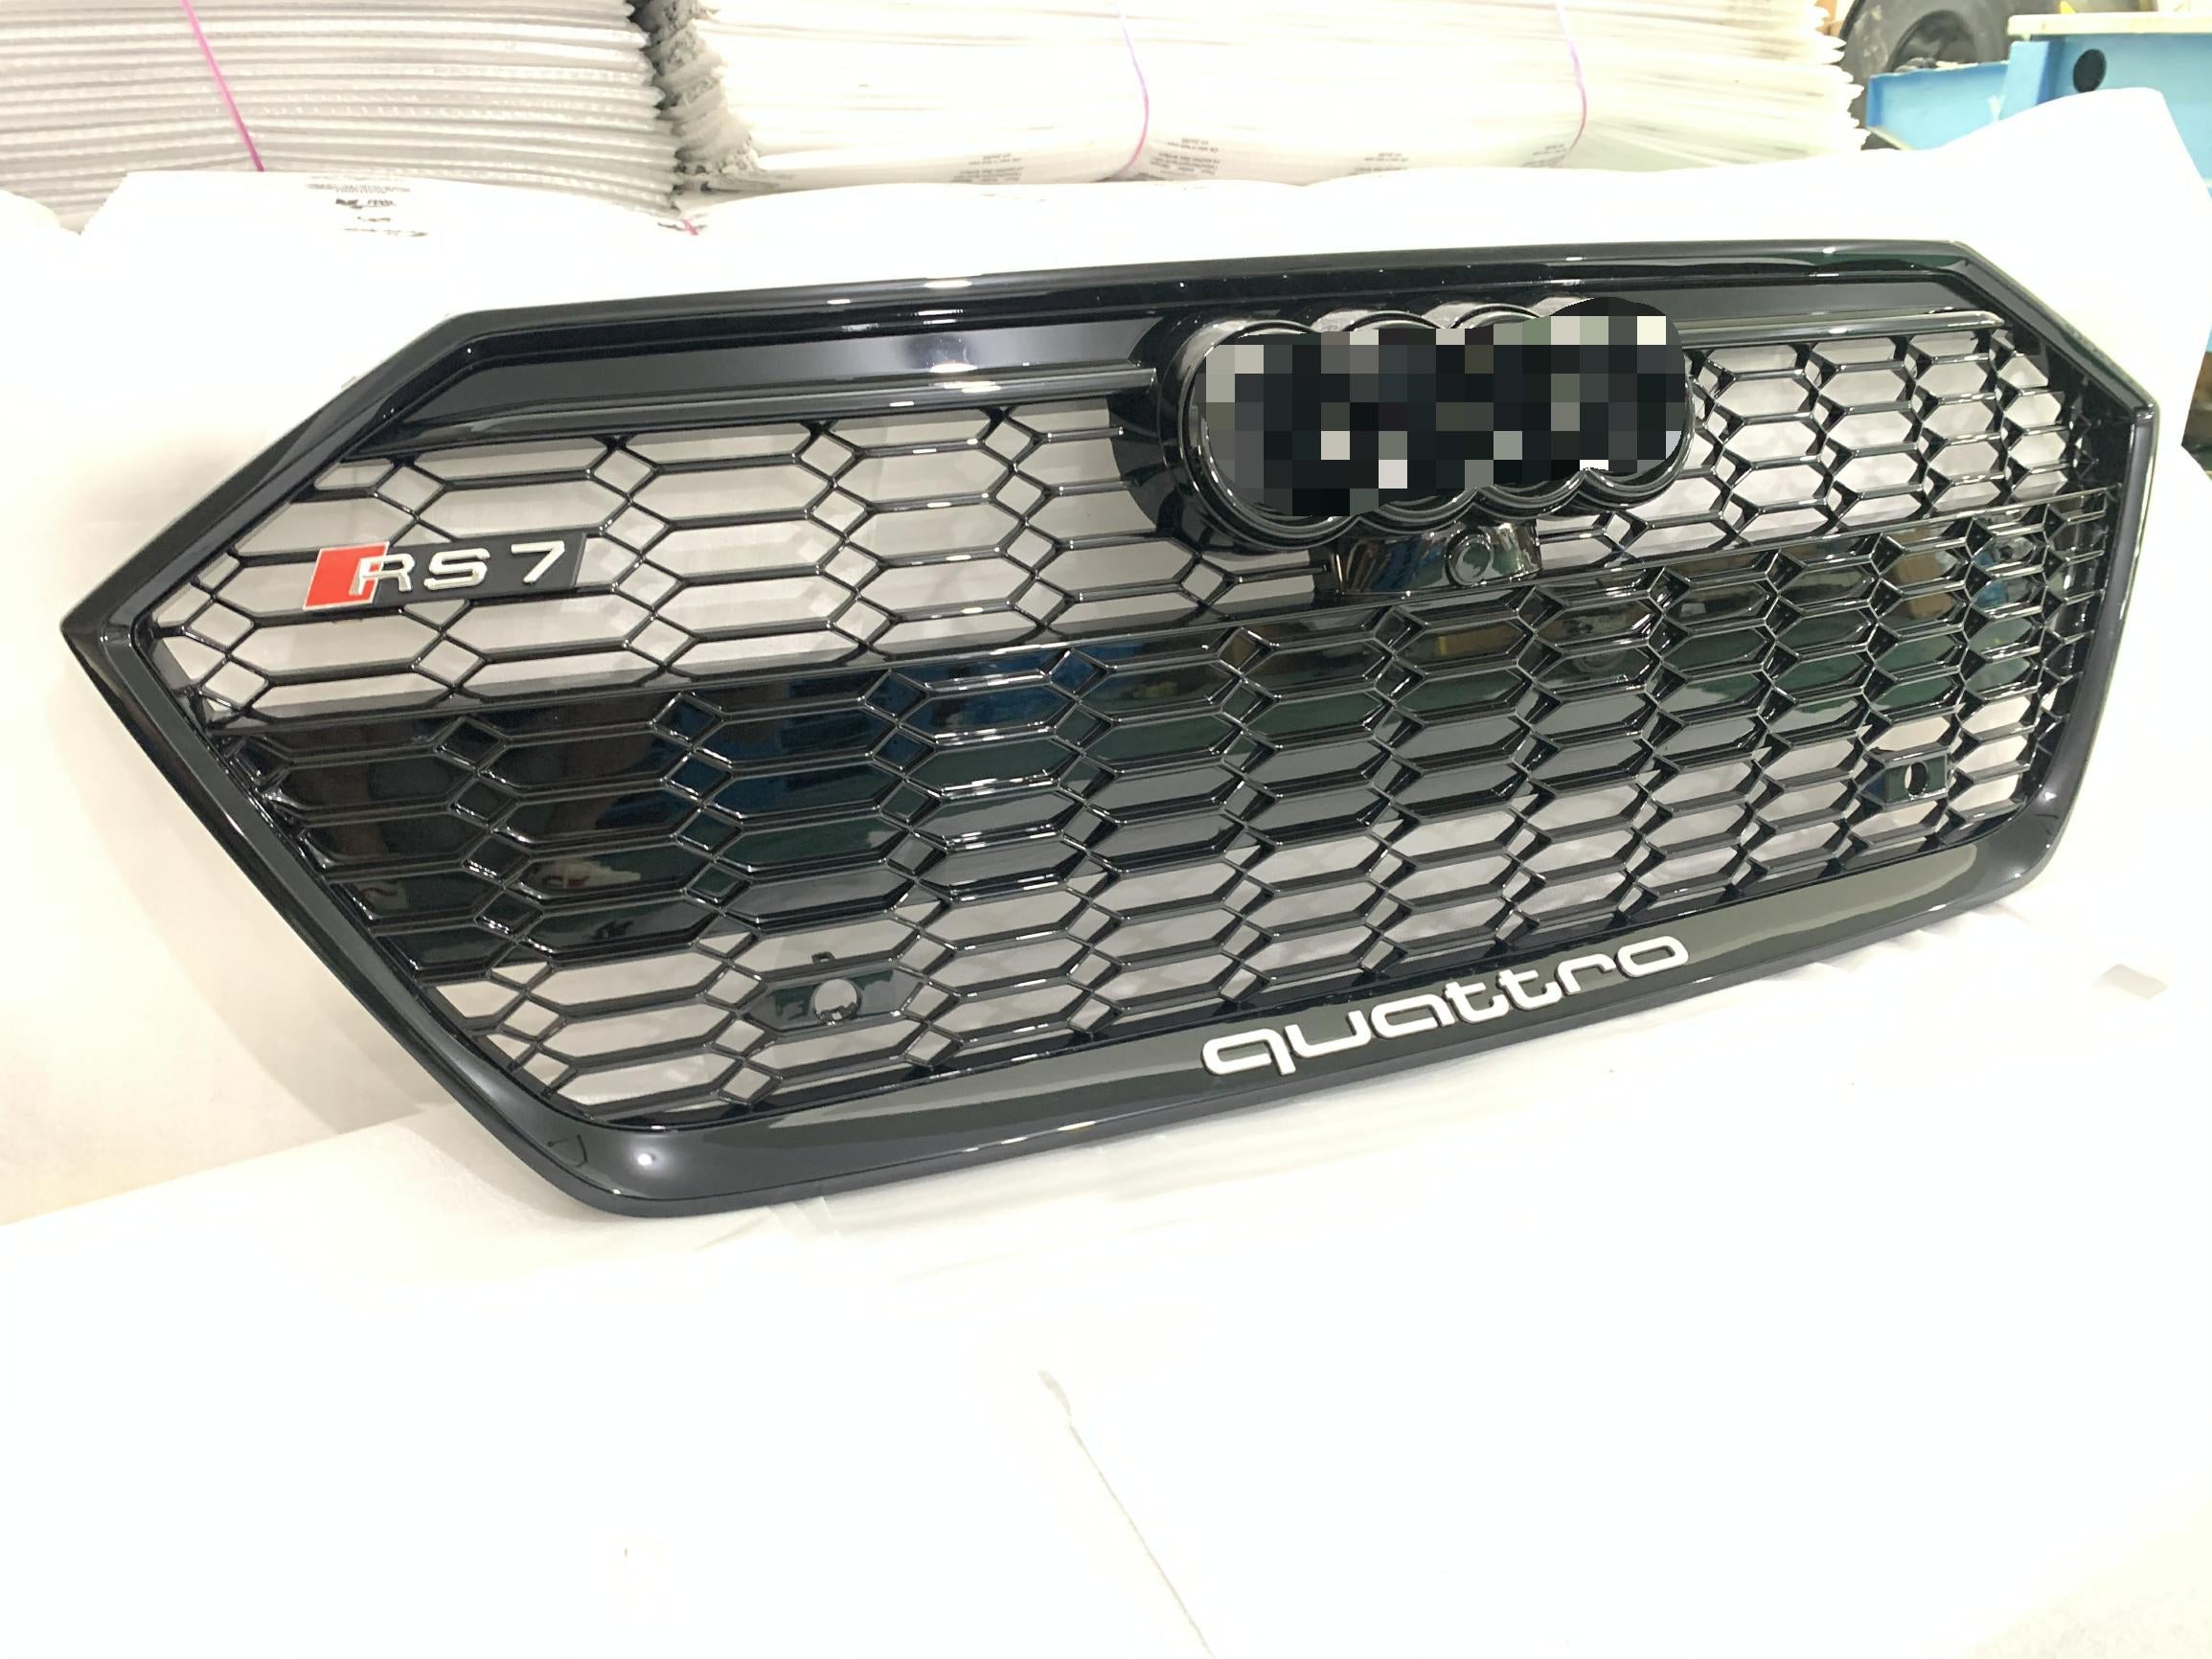 Audi A7/S7 (C8) Gloss Black OEM RS7 Style Front Grille -Manufactured from Black Plastic with a Gloss Black finish to give your A7/S7 Model that perfect finish. Inspired by the OEM RS7 Front grille styling, this product is the perfect addition to any A7/S7 C8 model. 